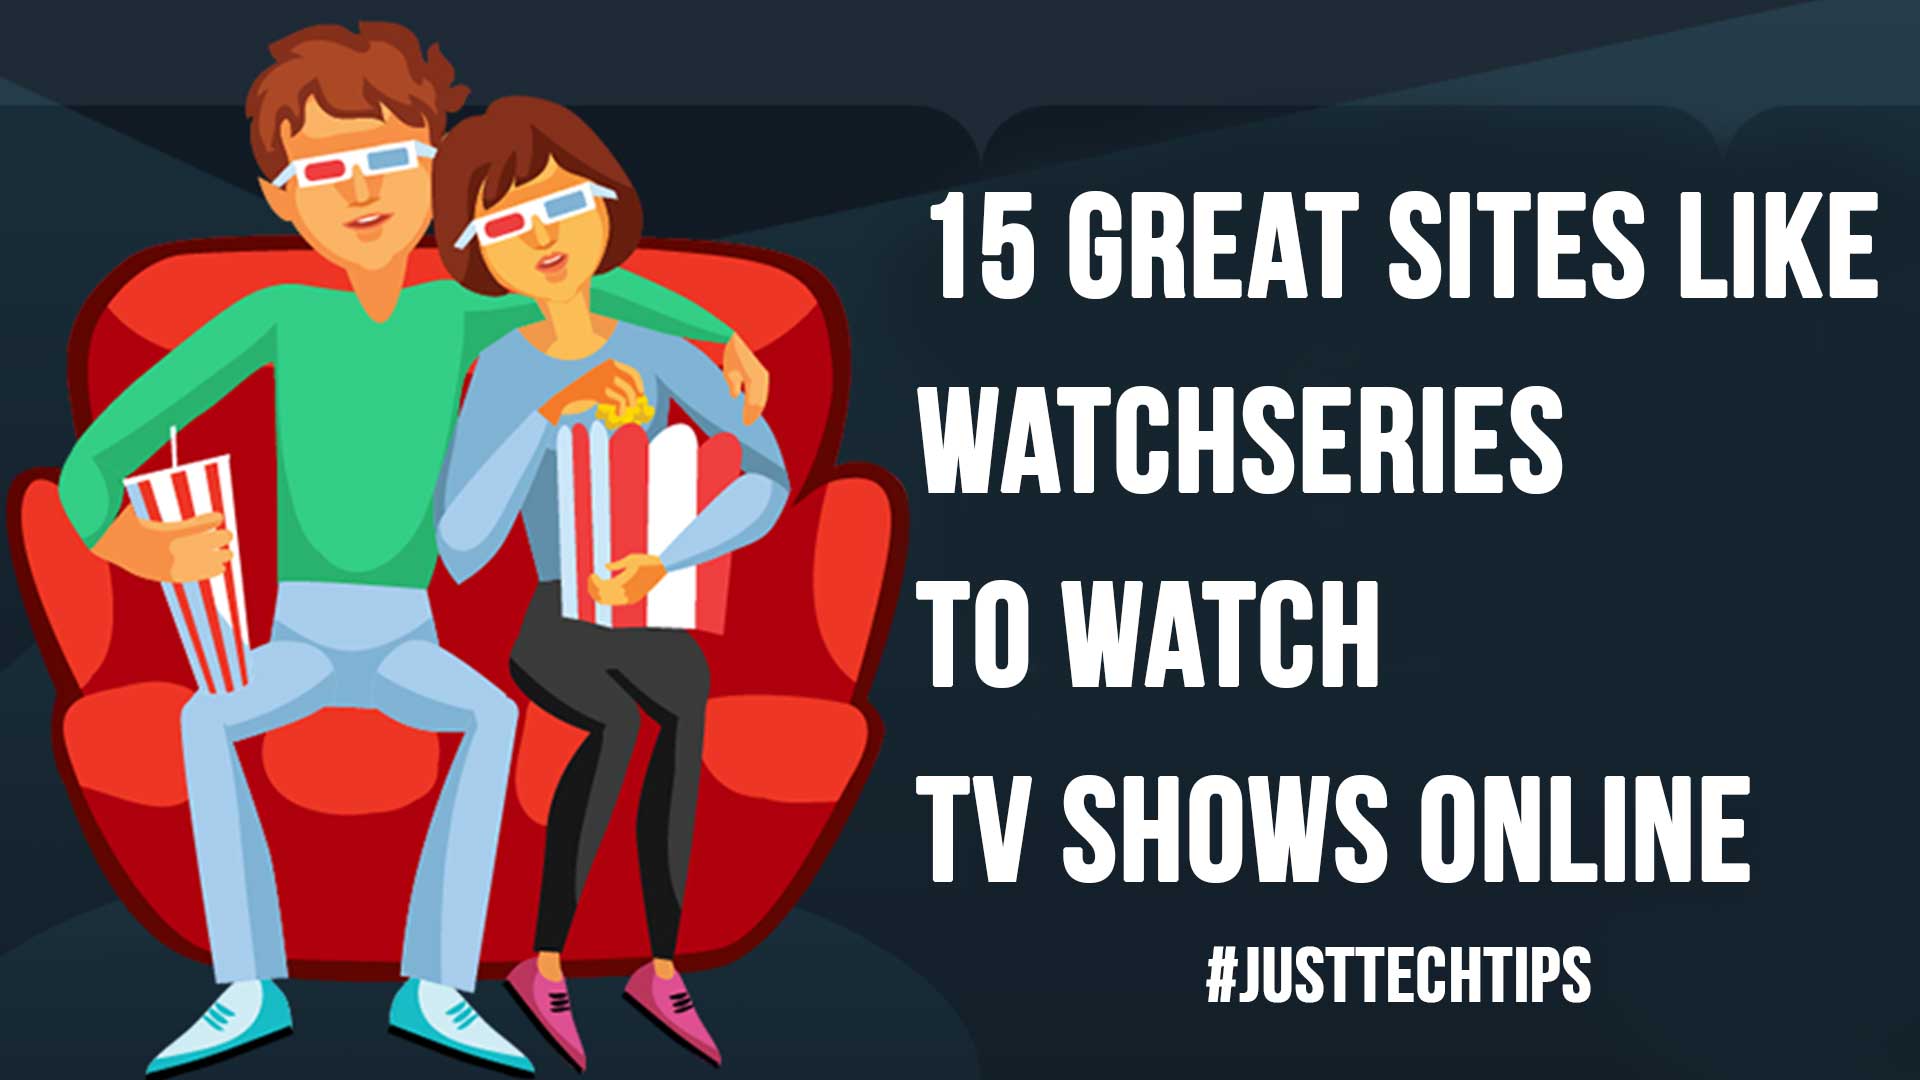 15 Great Sites Like WatchSeries to Watch TV Shows Online